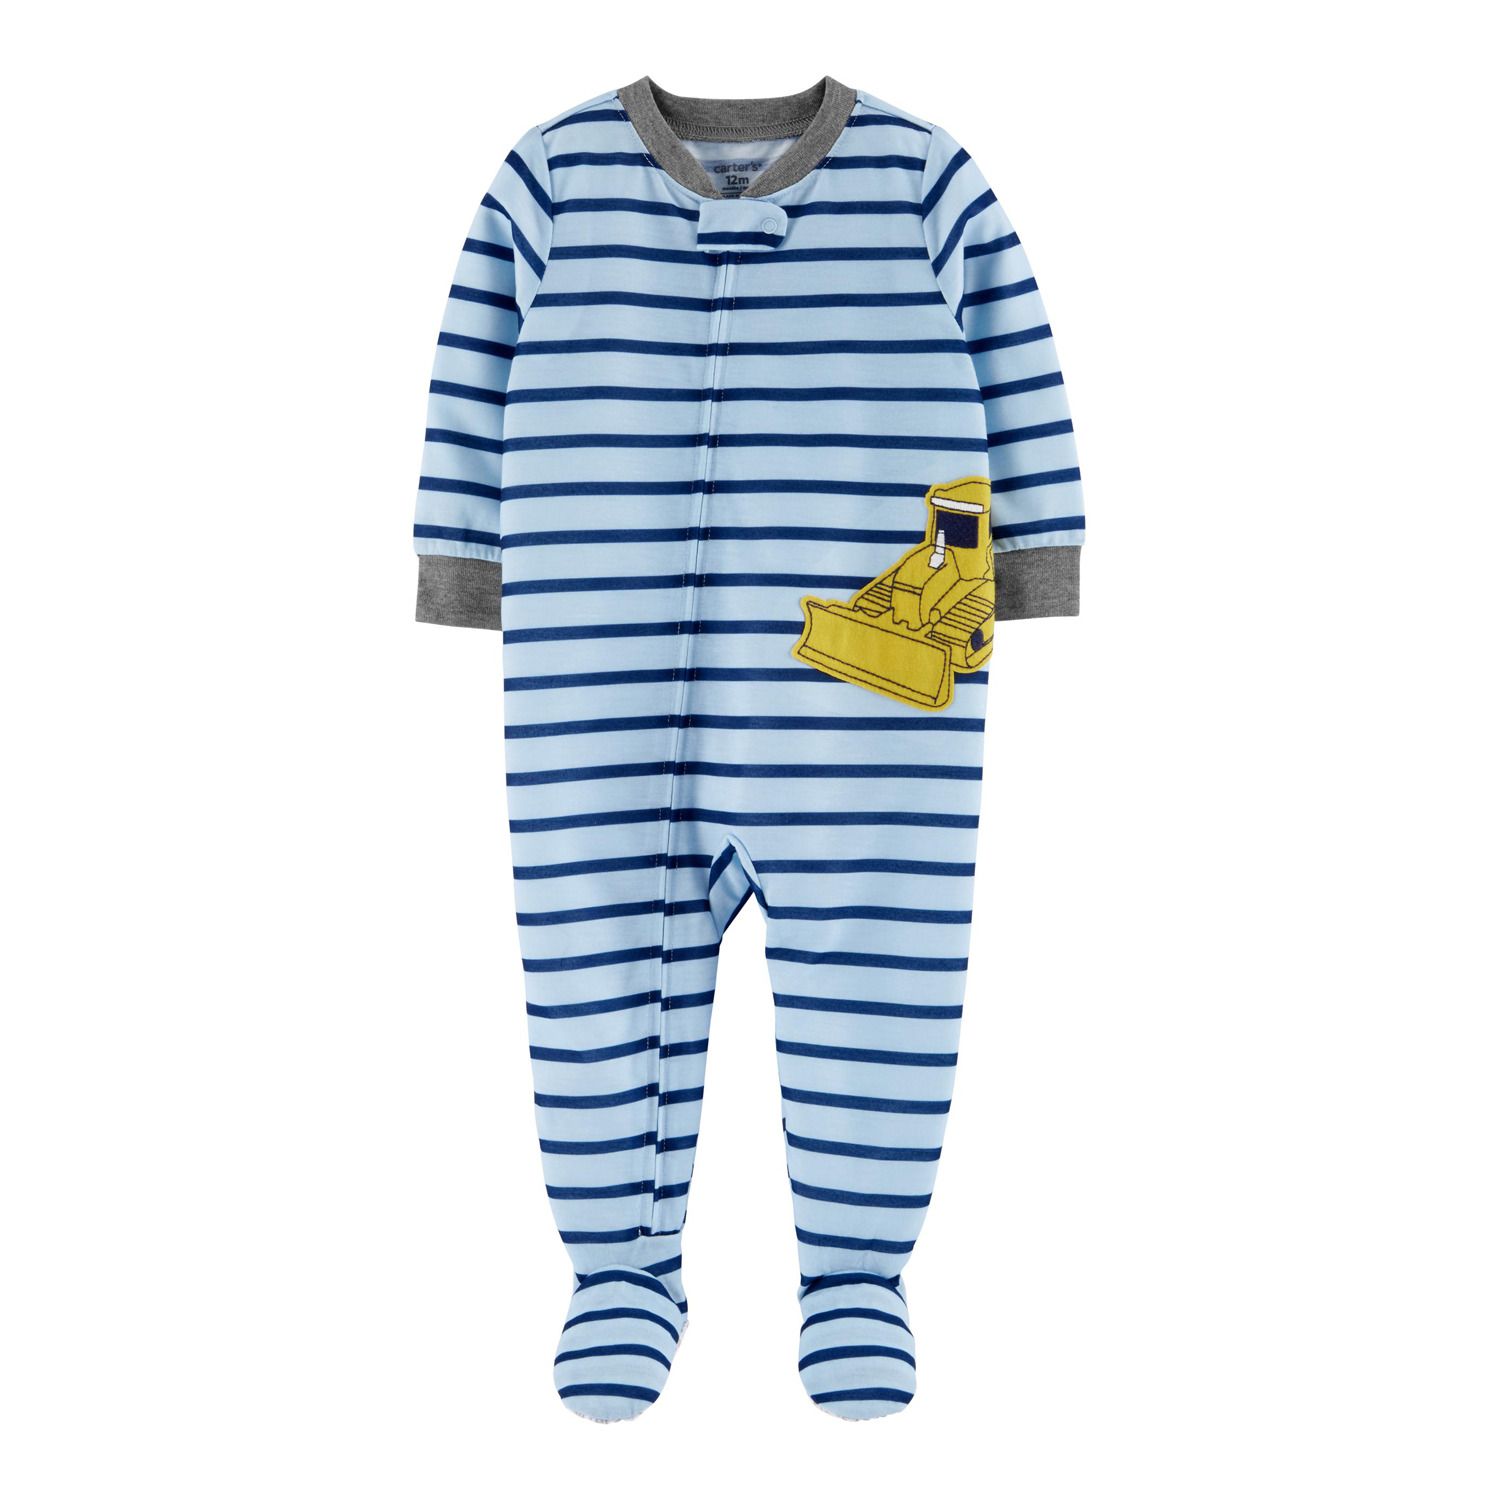 carter's 12 month footed pajamas